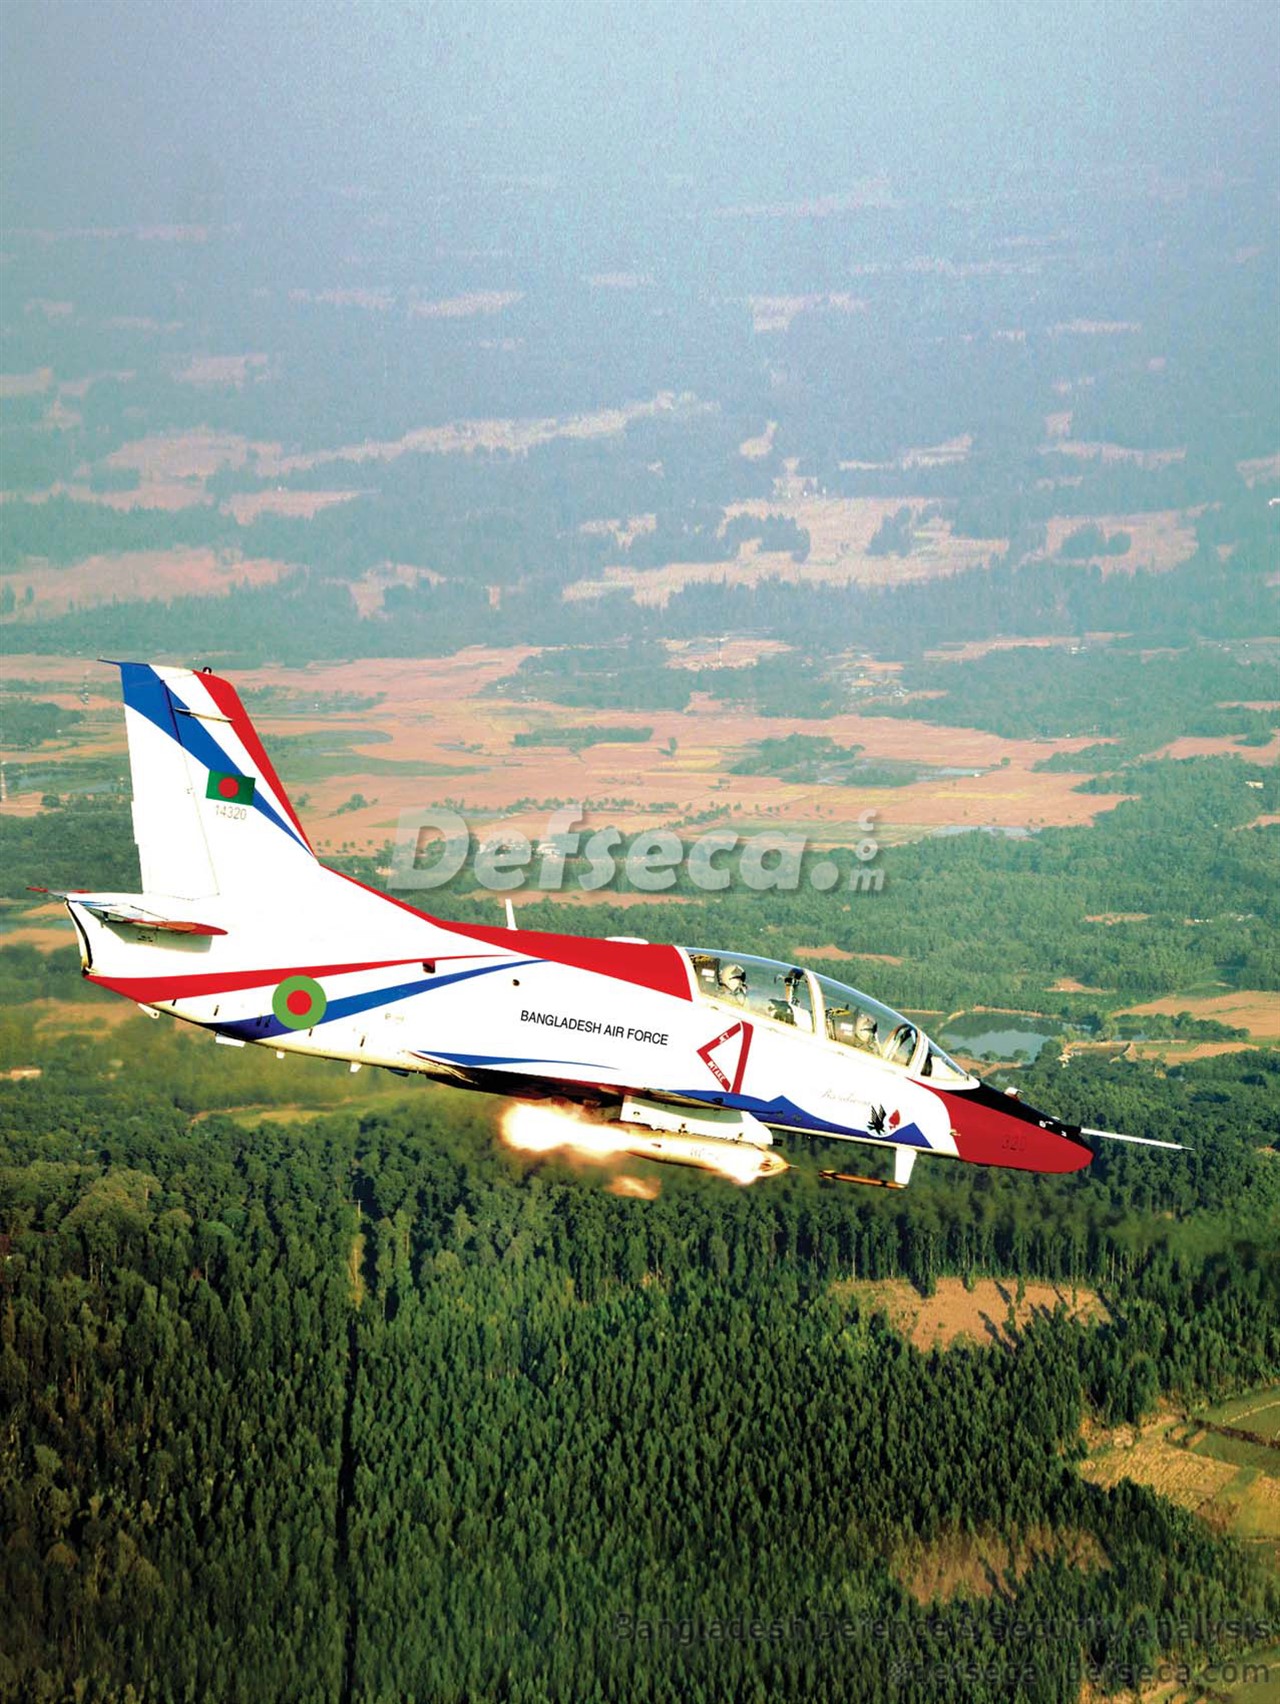 china-to-deliver-k-8w-jet-trainers-to-bangladesh-air-force-soon.jpg